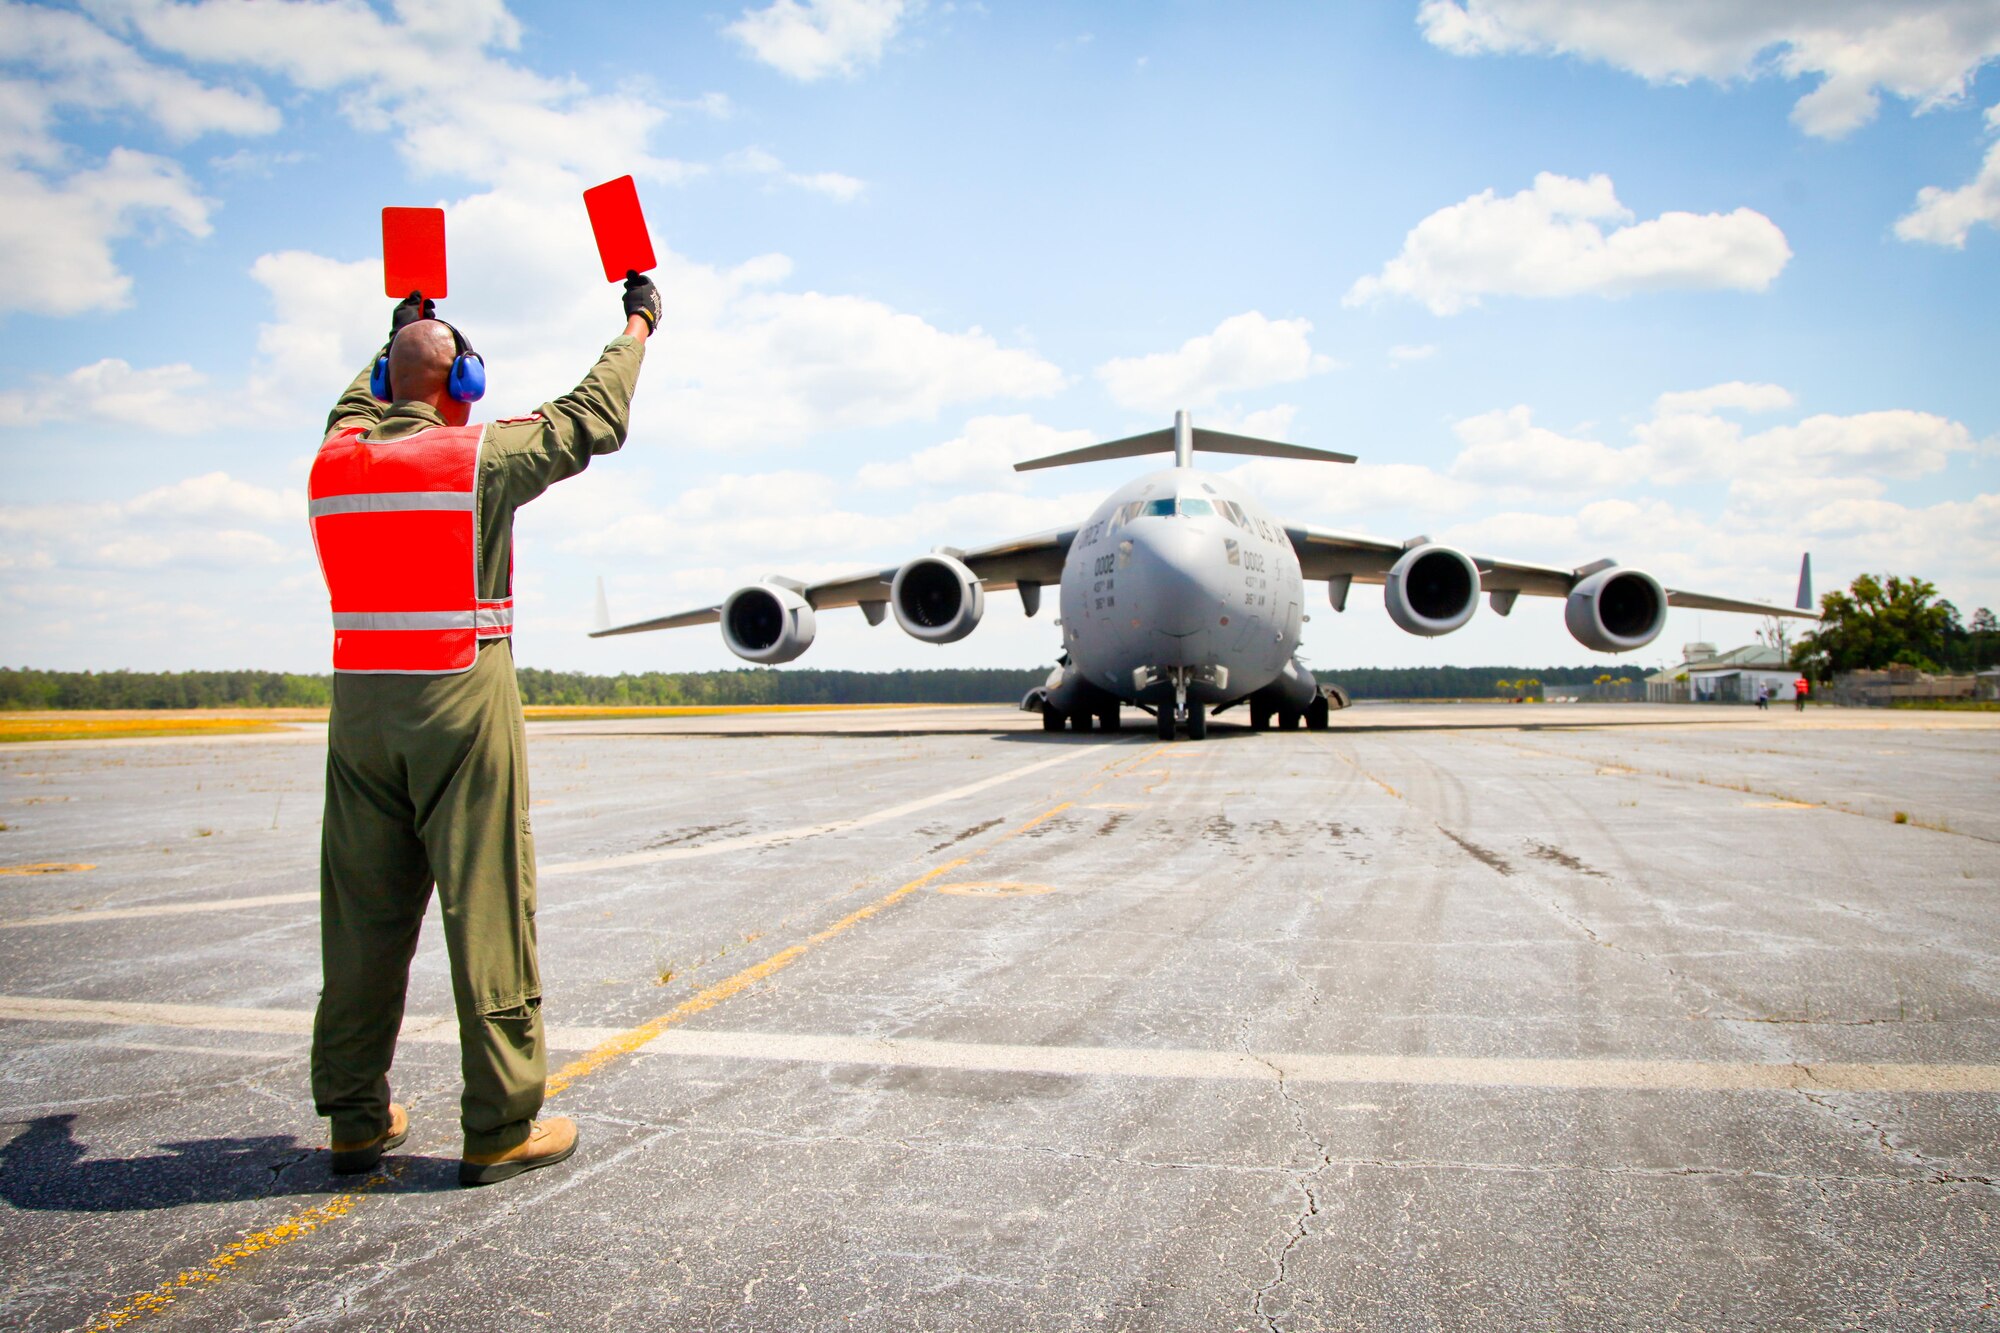 Master Sgt. Eric Walker, a loadmaster with the 315th Airlift Control Flight at Joint Base Charleston, S.C., marshals in a C-17 Globemaster III to its parking spot Friday at Wright Army Airfield, Ga. C-17's from JB Charleston, S.C., and Wright-Patterson Air Force Base, Ohio, transported four tanks from Wright AAF to McEntire Air National Guard Base, S.C., in support of a tank movement for the 1/118th CAB. (U.S. Air Force photo by Staff Sgt. Rashard Coaxum/released)